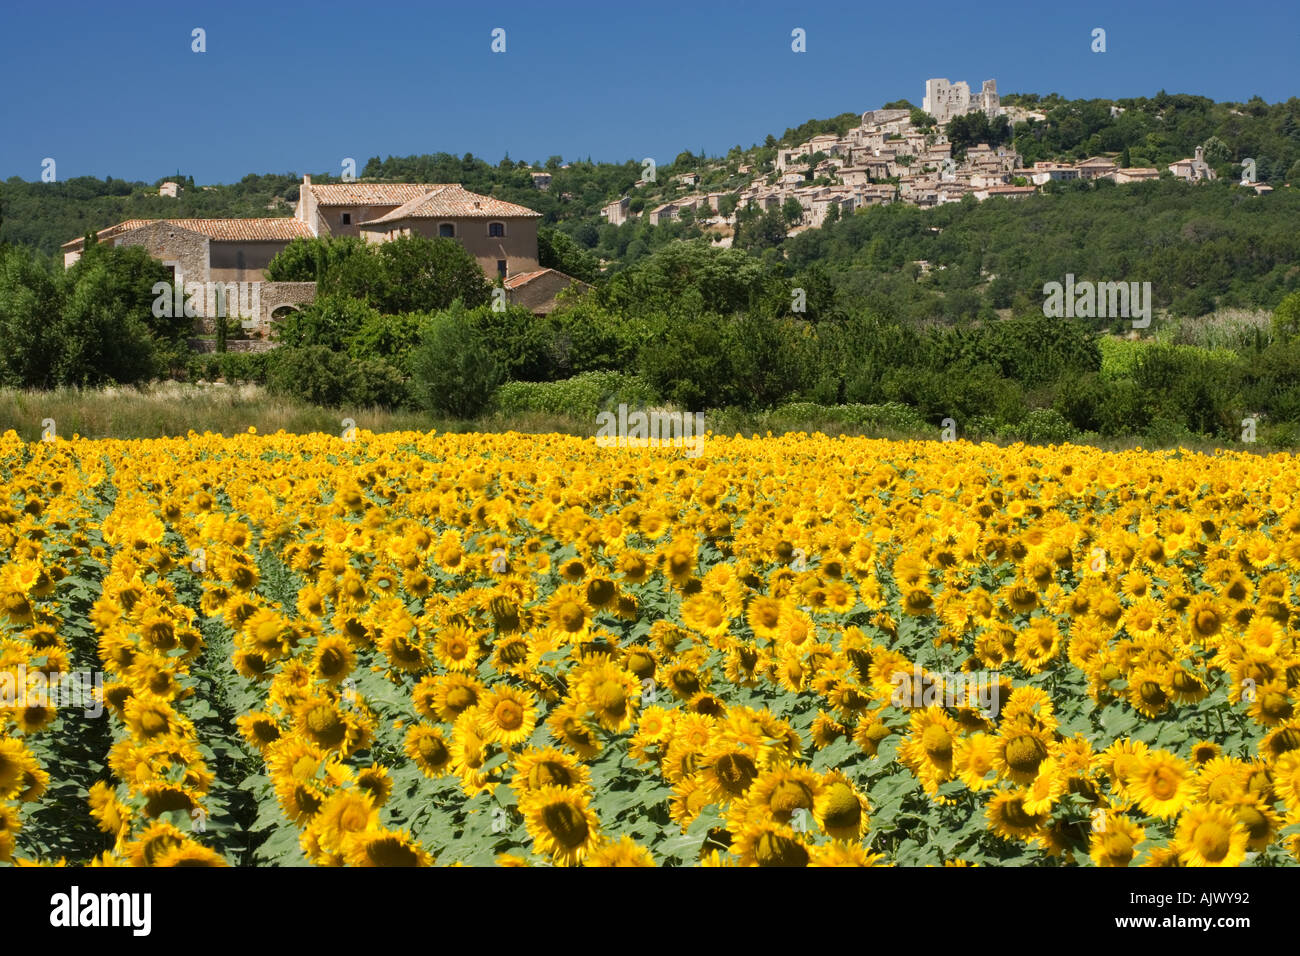 France Provence View over Sunflowers to Hilltop village of Lacoste Stock Photo